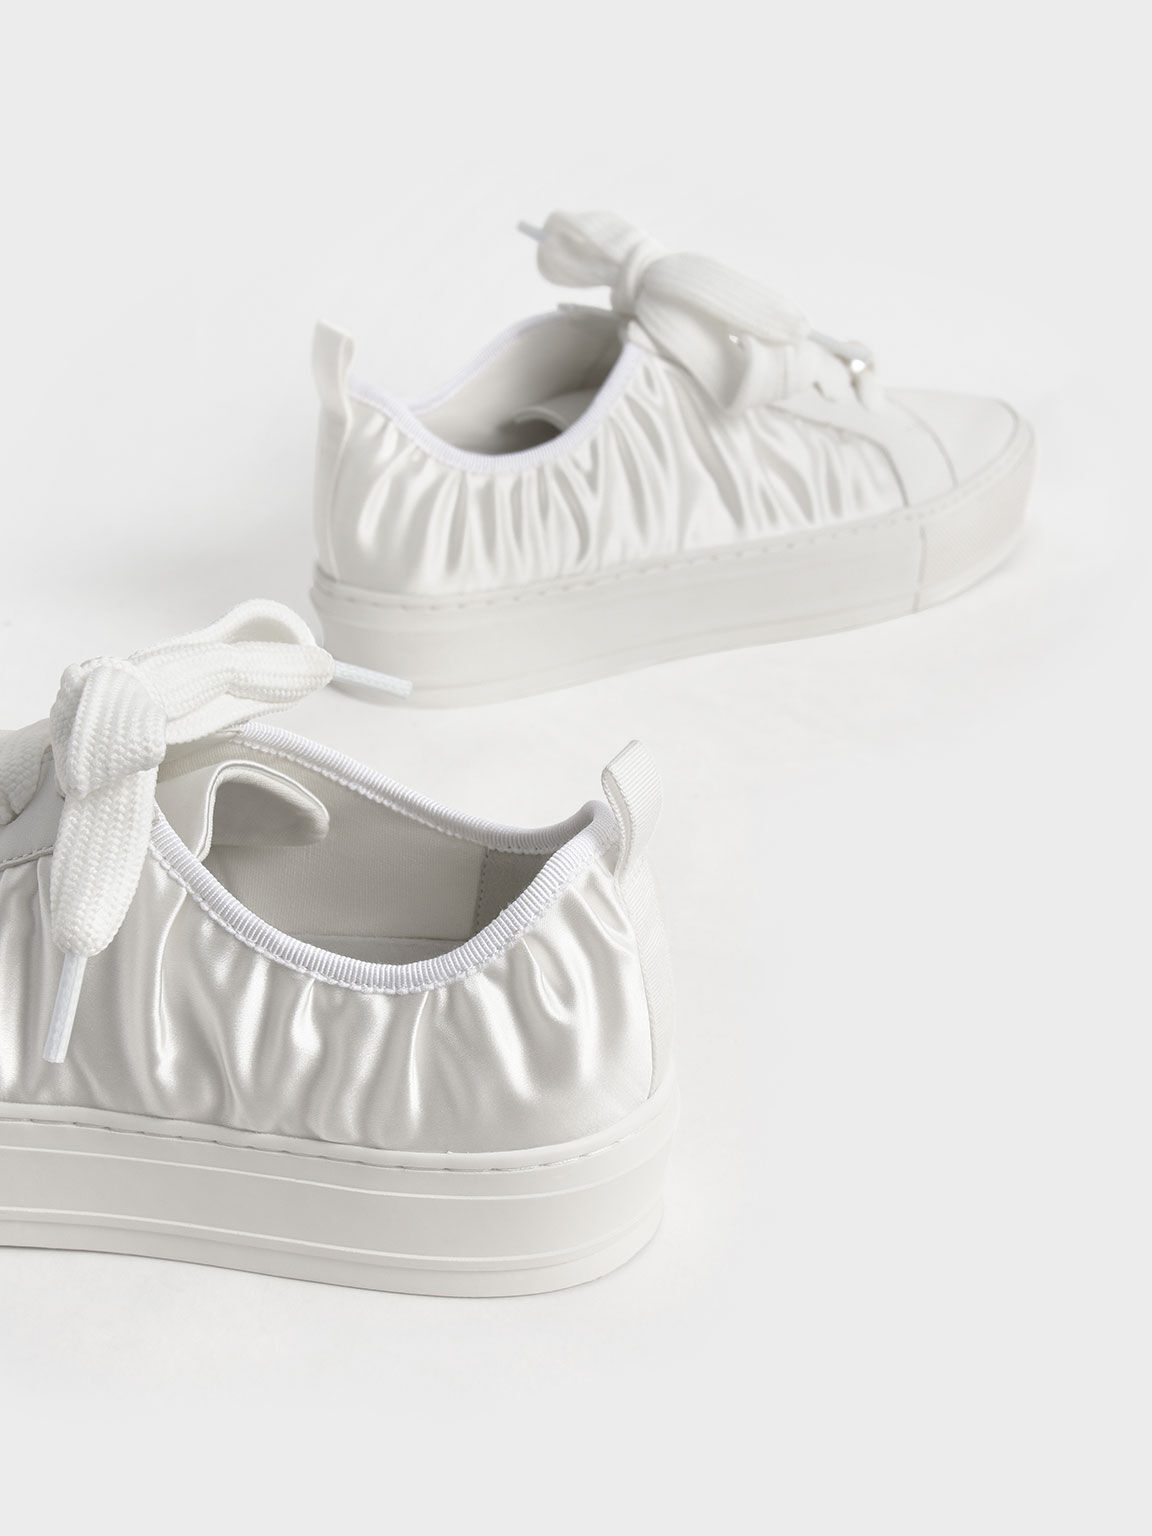 Top more than 142 white embellished sneakers best